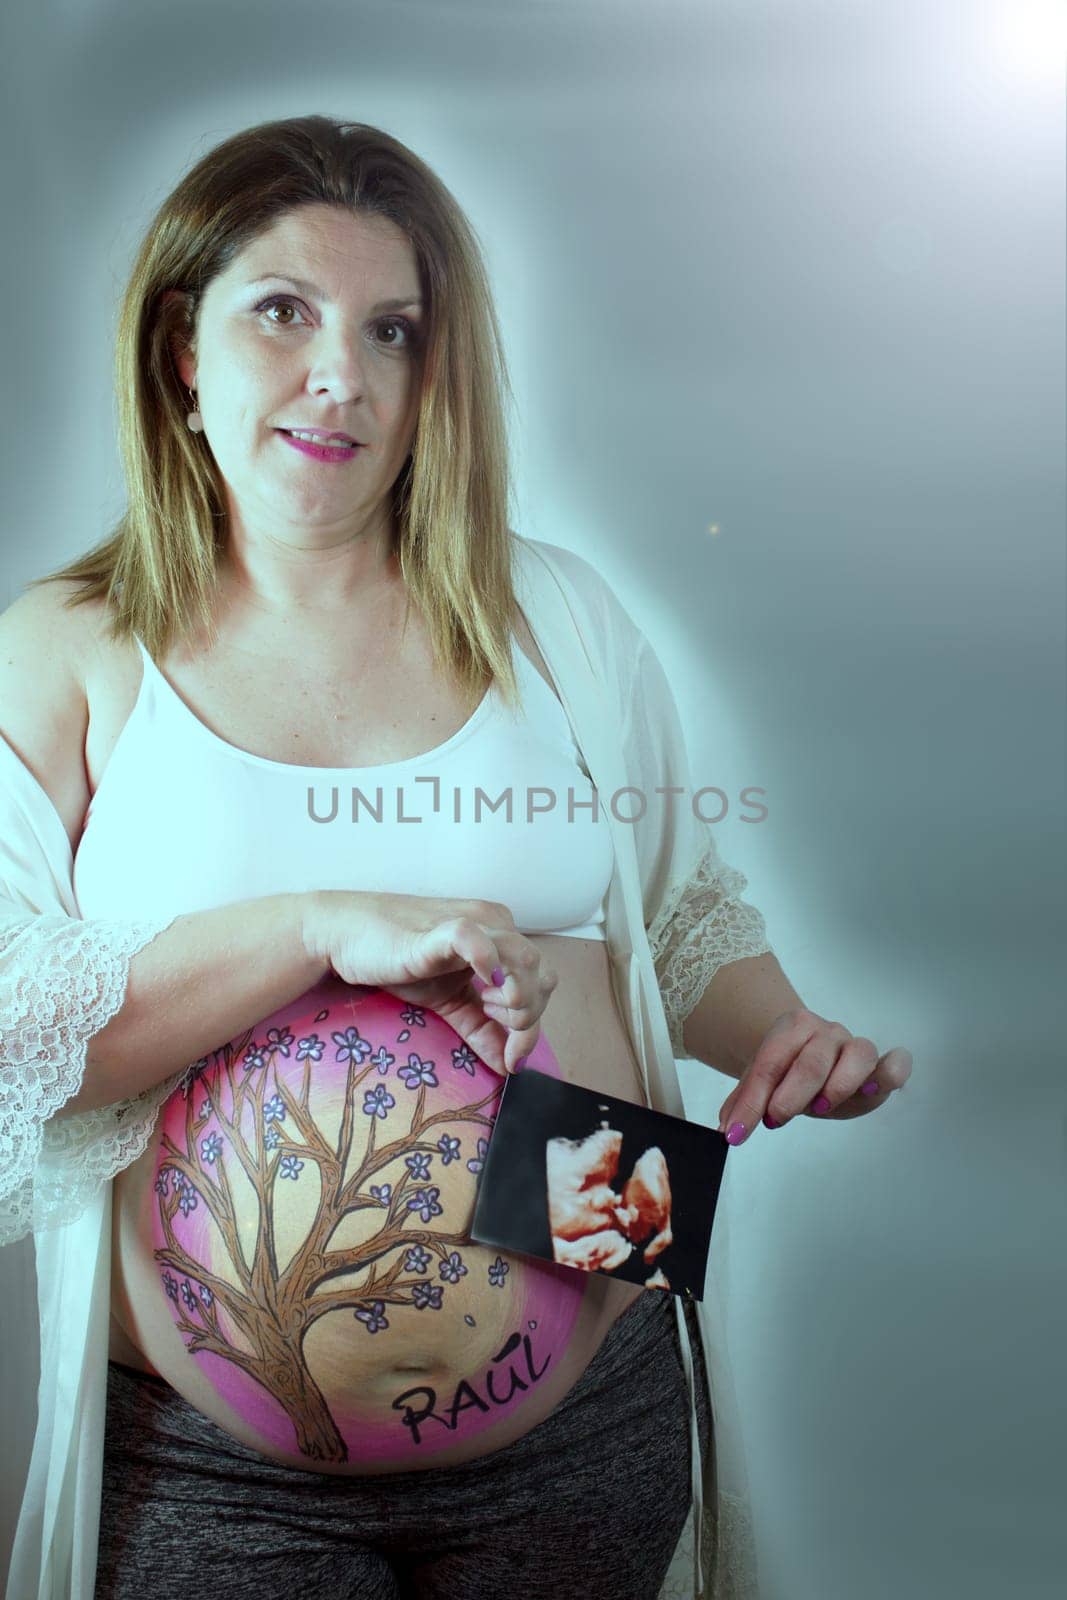 Eight month pregnant woman holding ultrasound scan of baby. No copy space